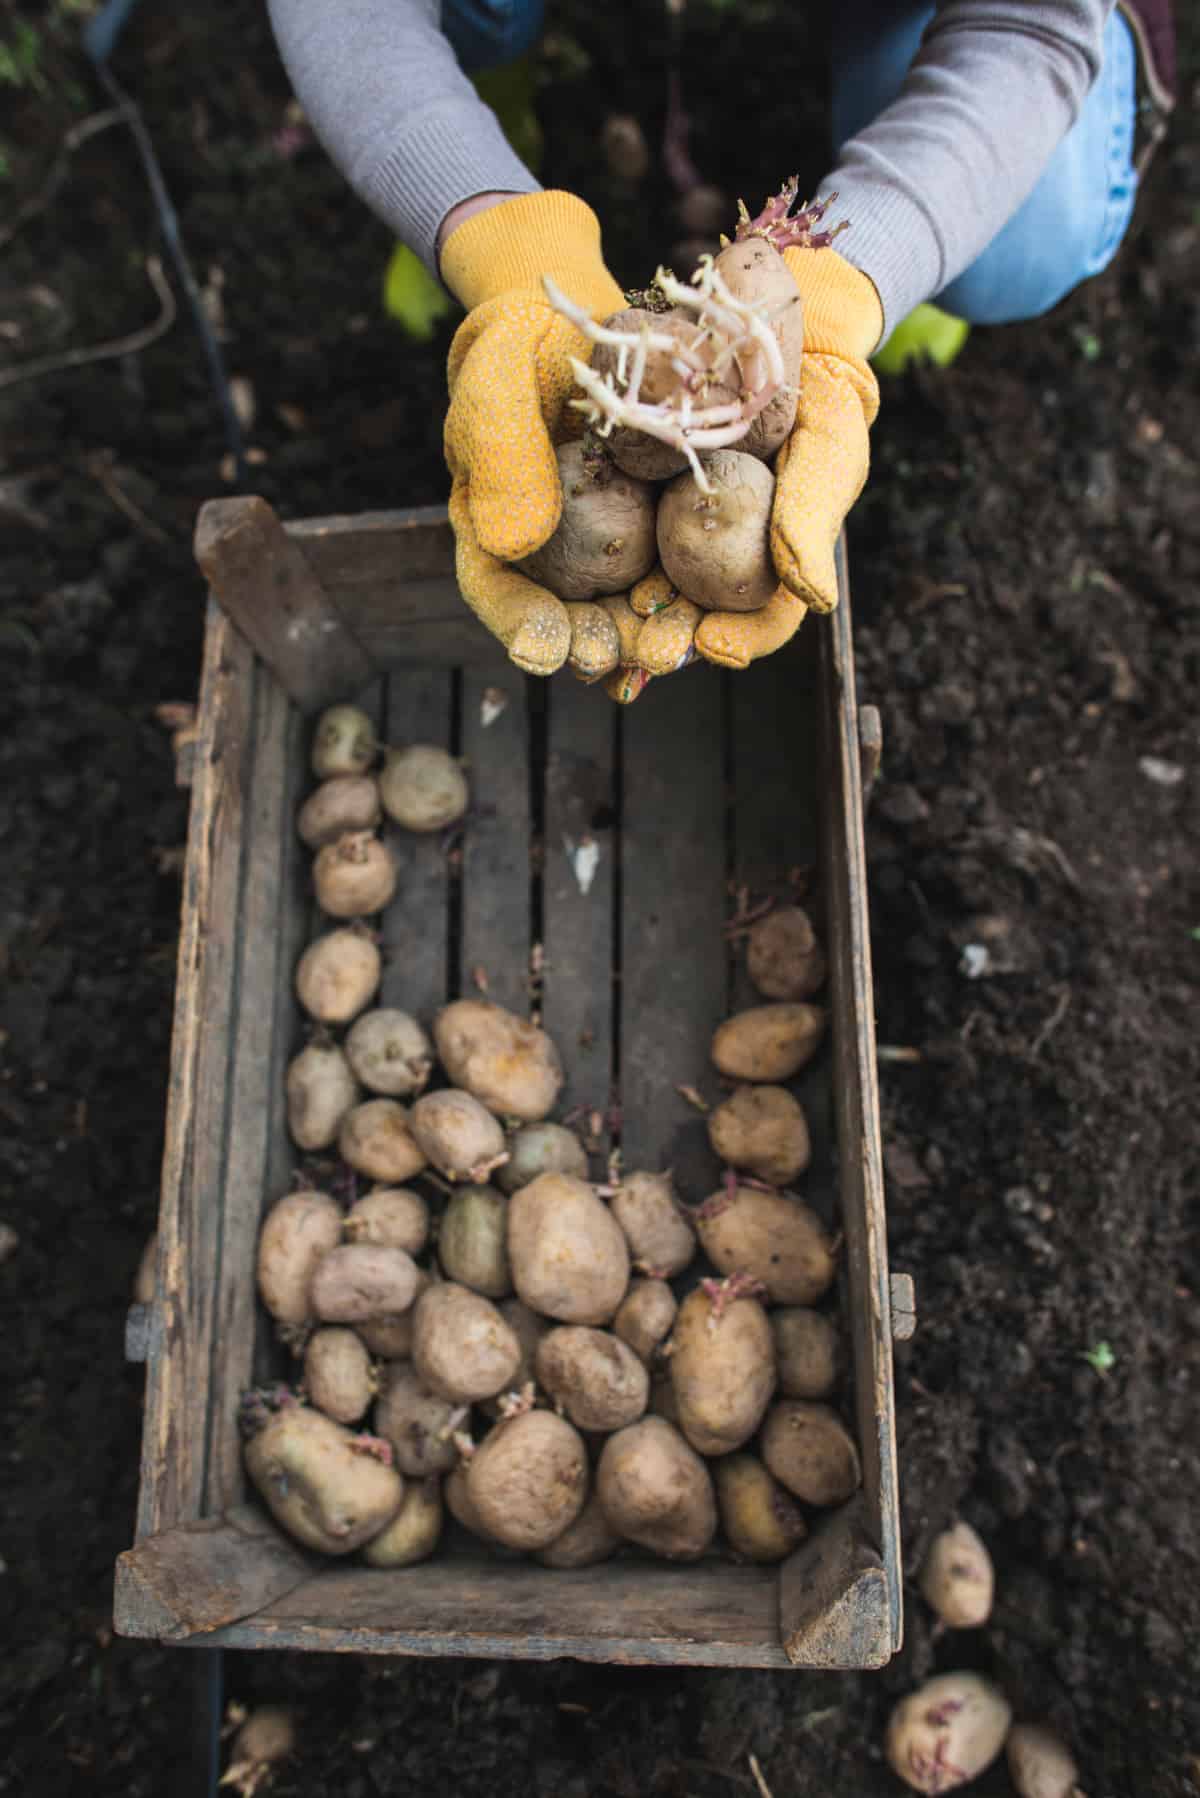 YayImages, what is chitting potatoes, seeding potatoes